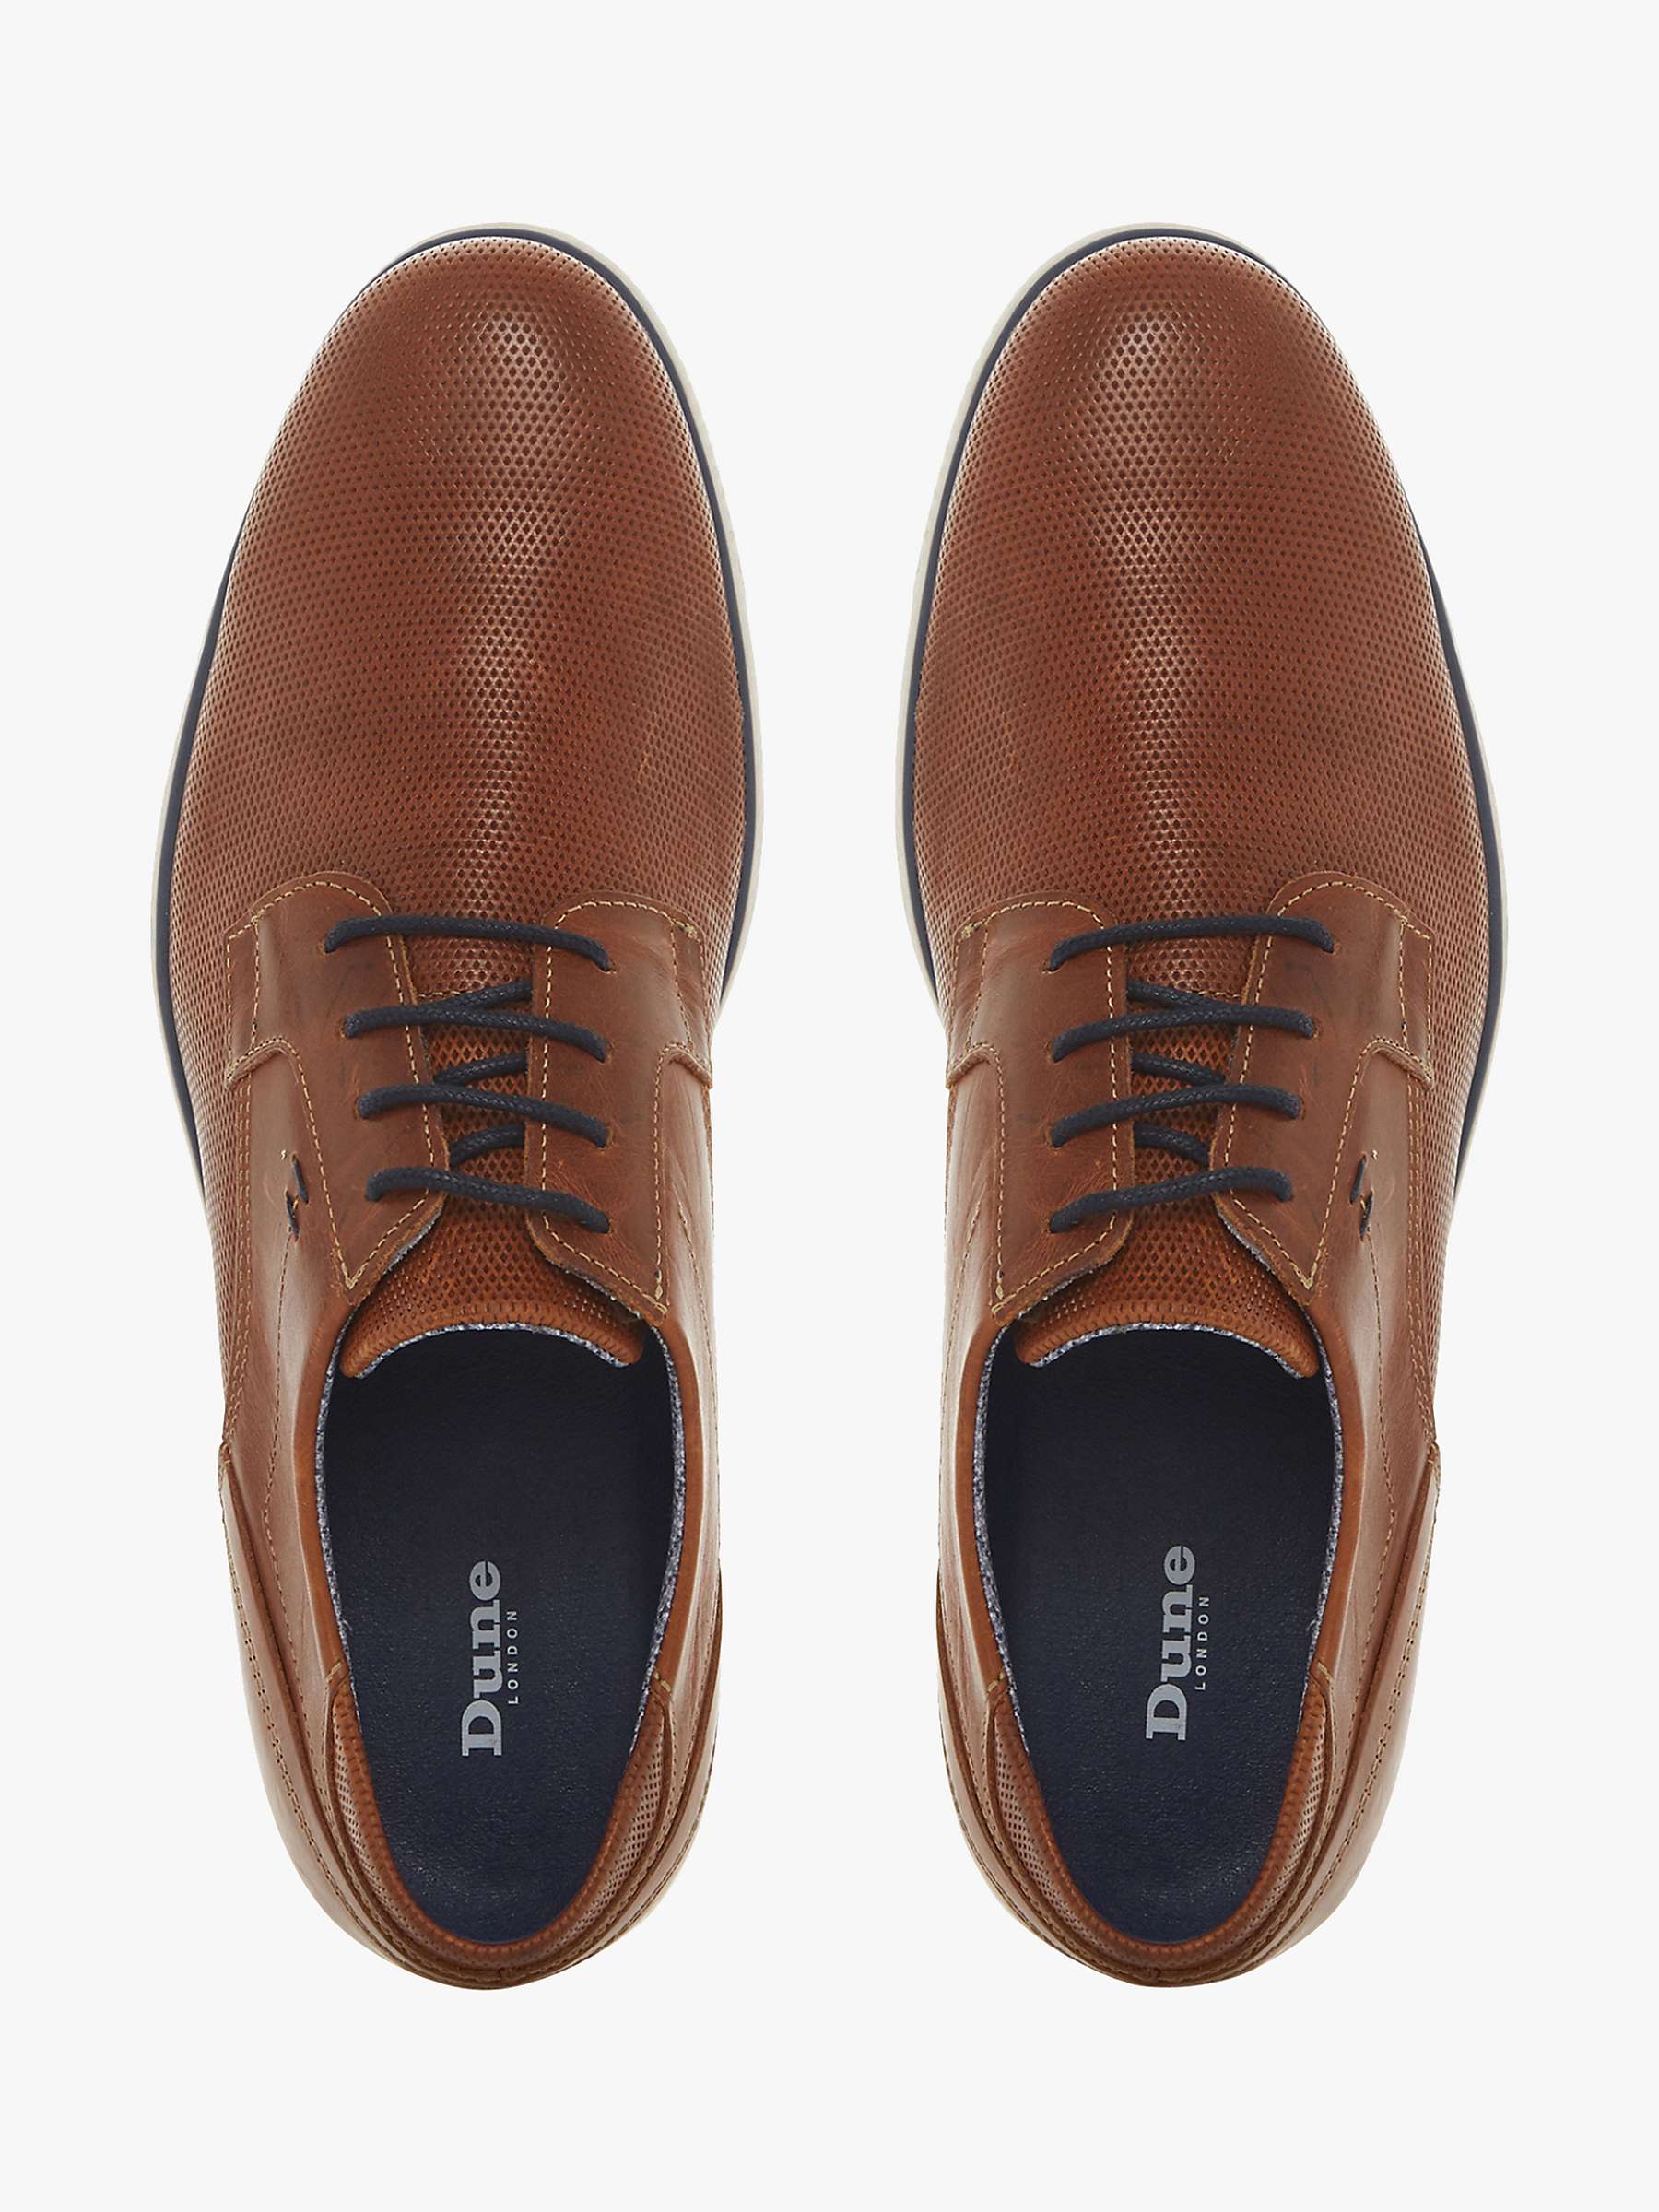 Dune Bamfield Leather Derby Shoes, Tan at John Lewis & Partners